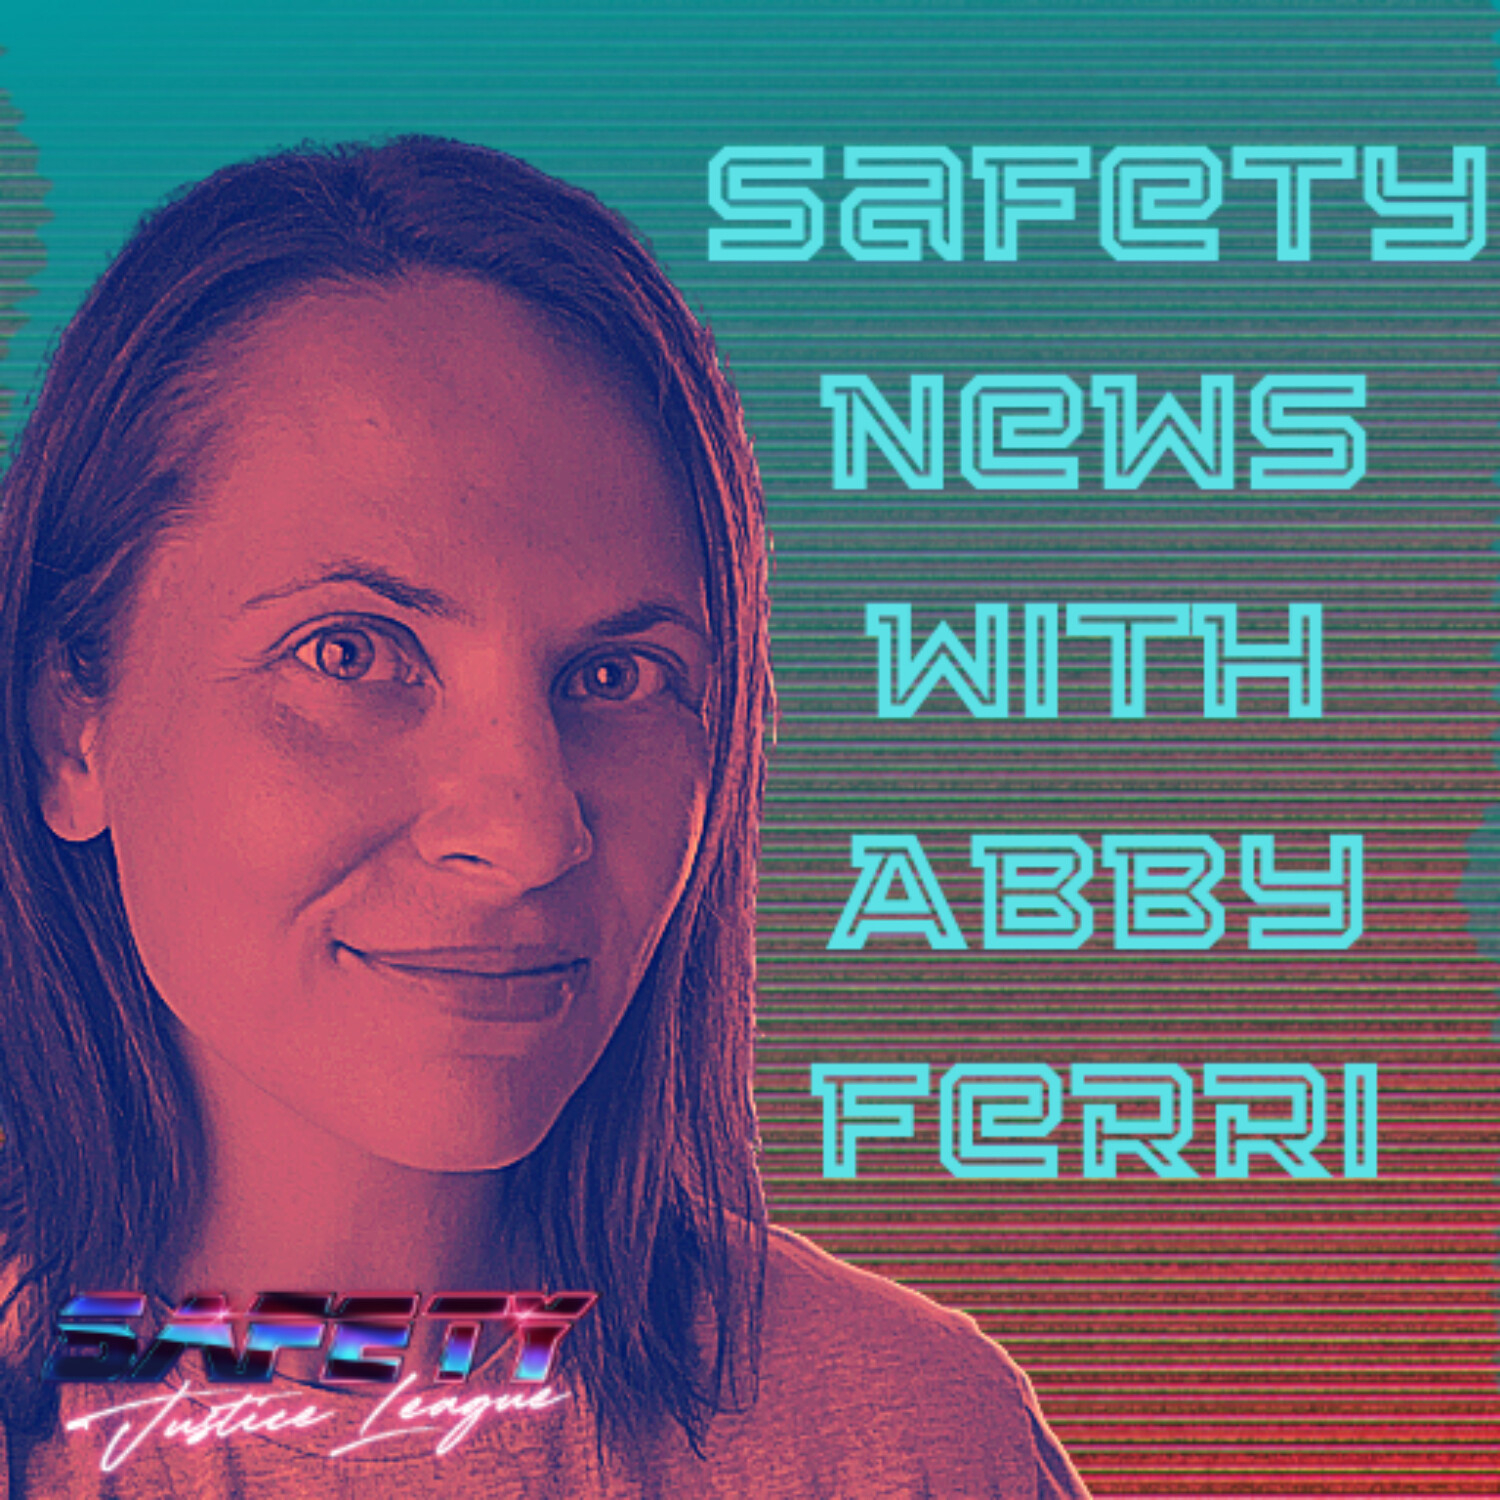 Safety News with Abby Ferri